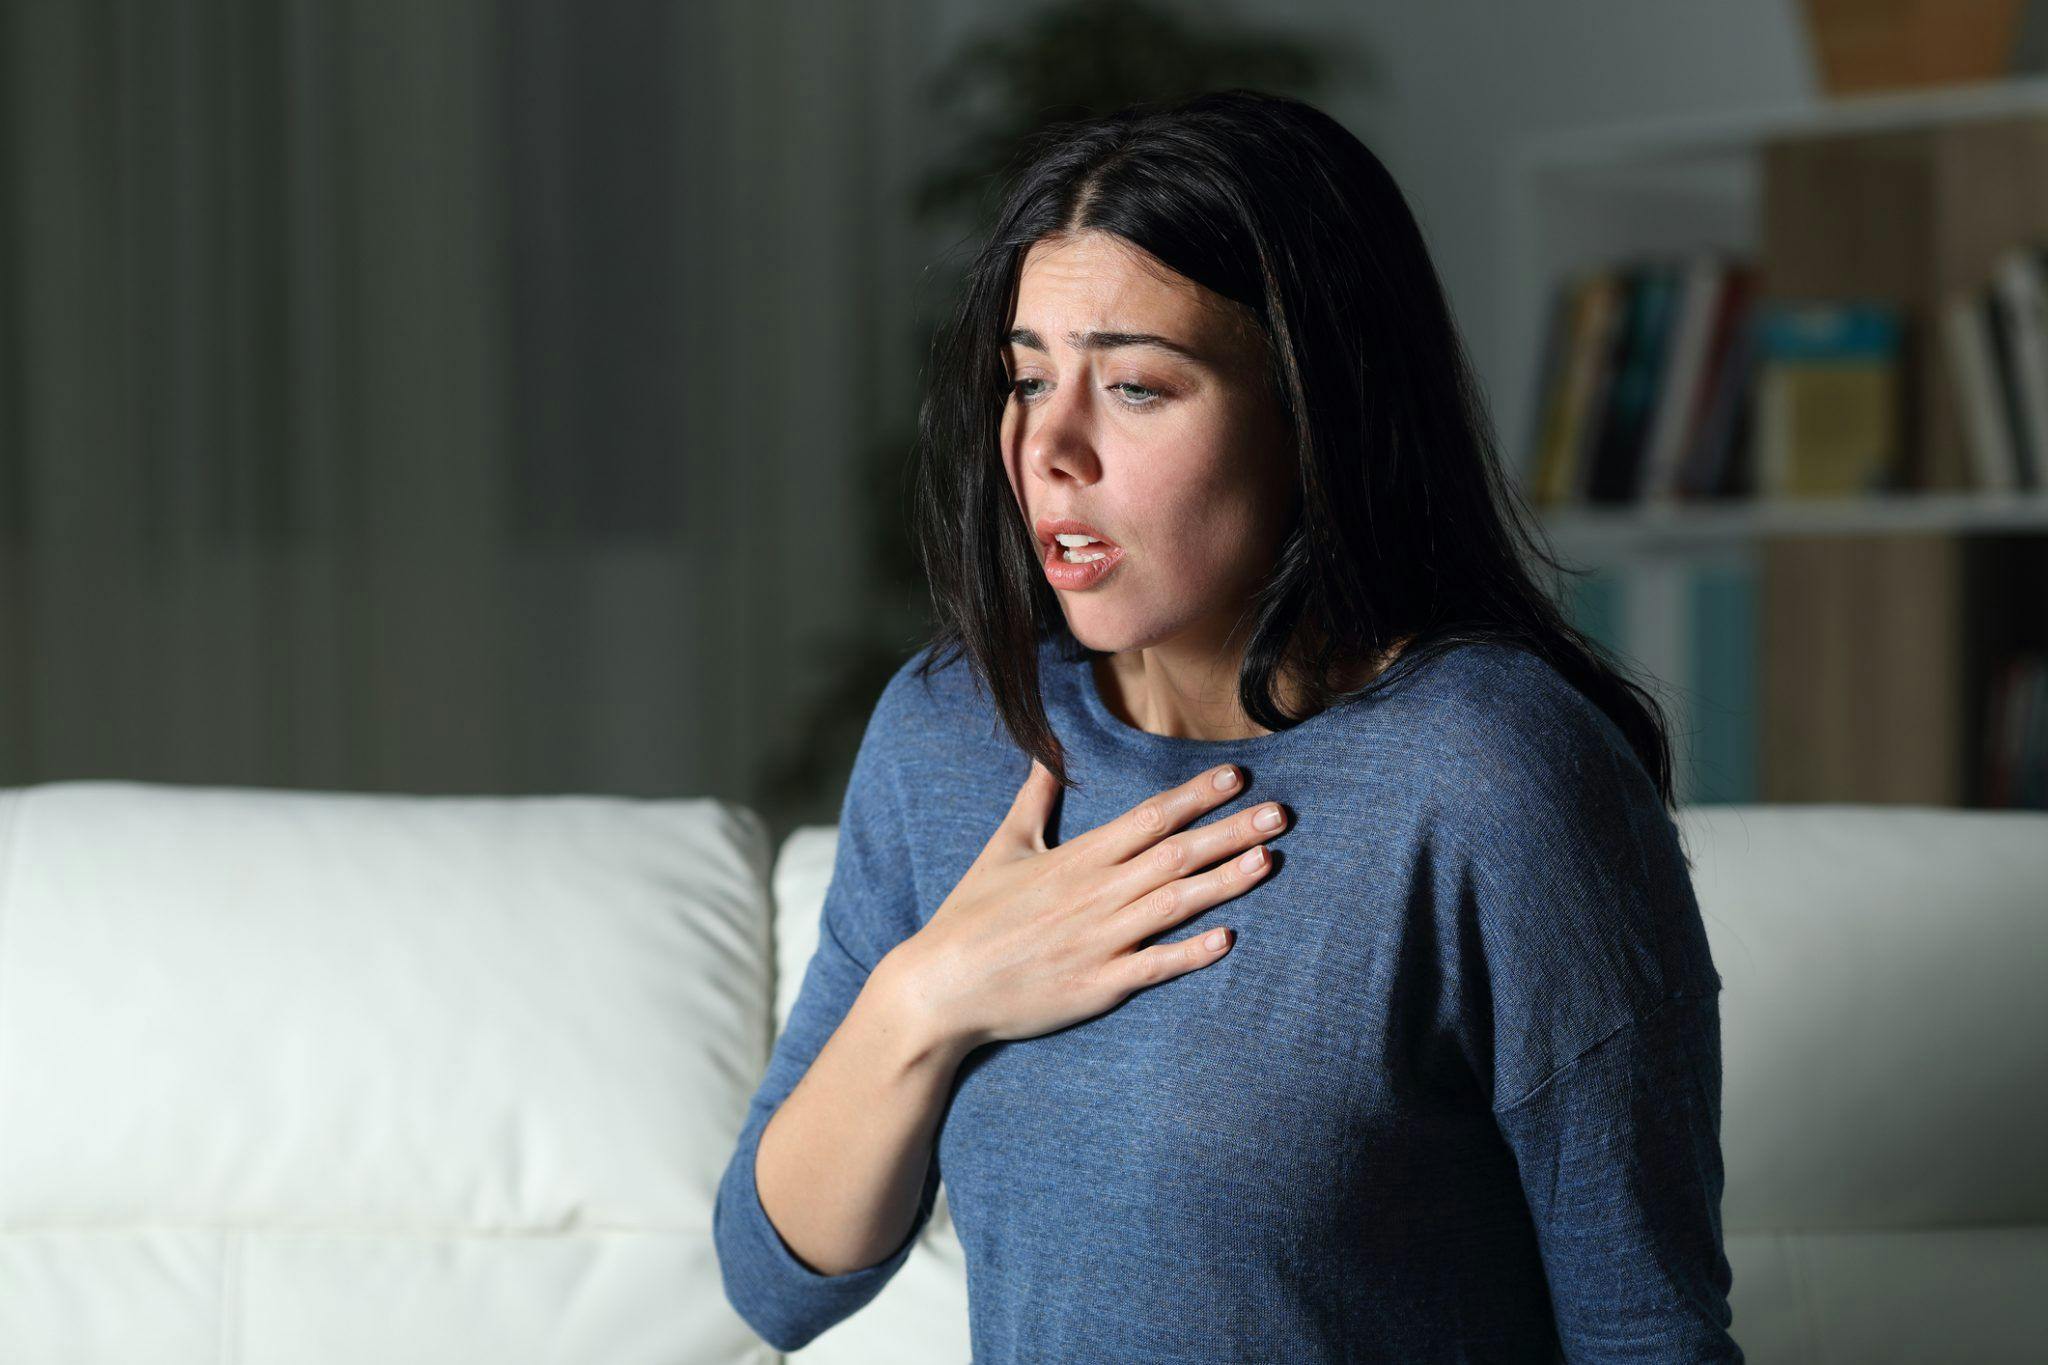 Woman Suffering an Anxiety Attack Alone in the Night Stock Photo | Image Credit iStockPhoto.com